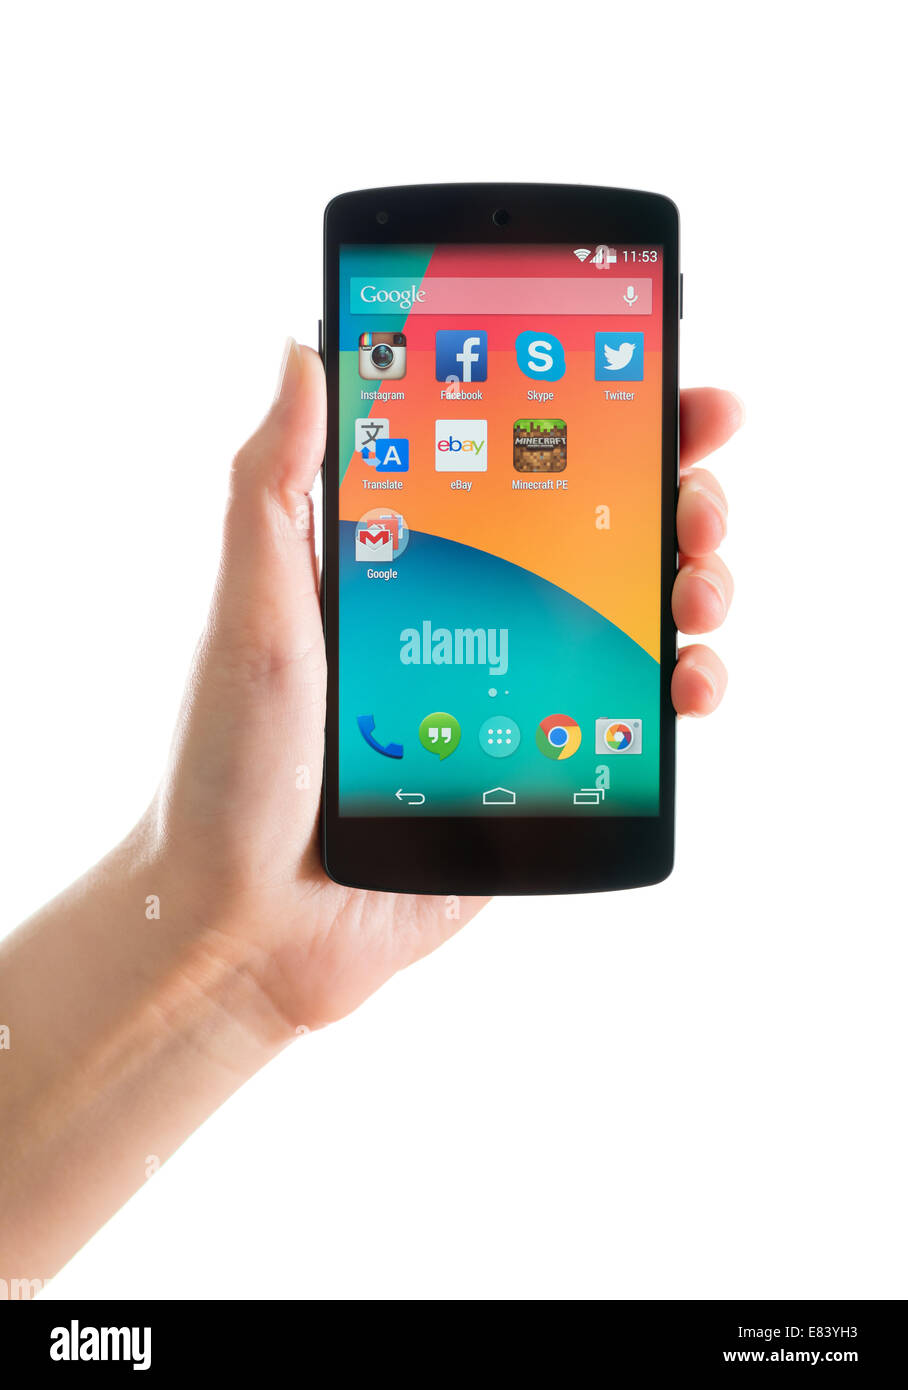 Studio shot of woman hand holding brand new Google Nexus 5, powered by Android 4.4 version, manufactured by LG Electronics. Stock Photo